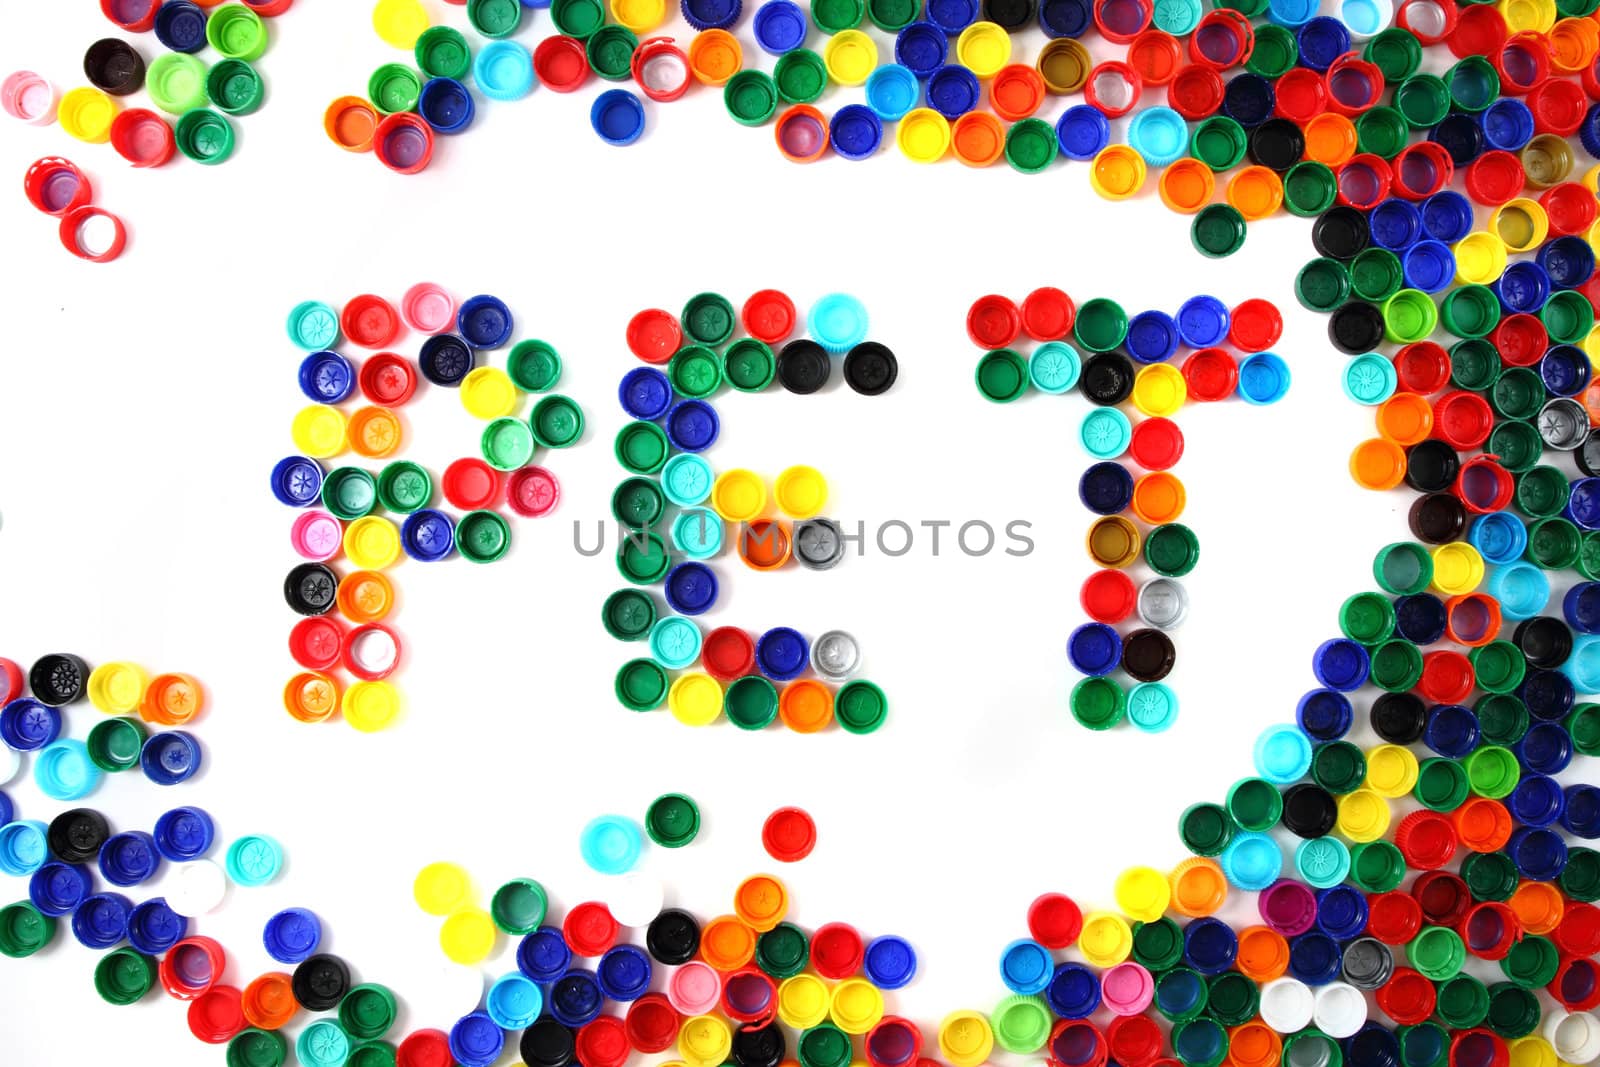 word pet from color plastic caps isolated on the white background